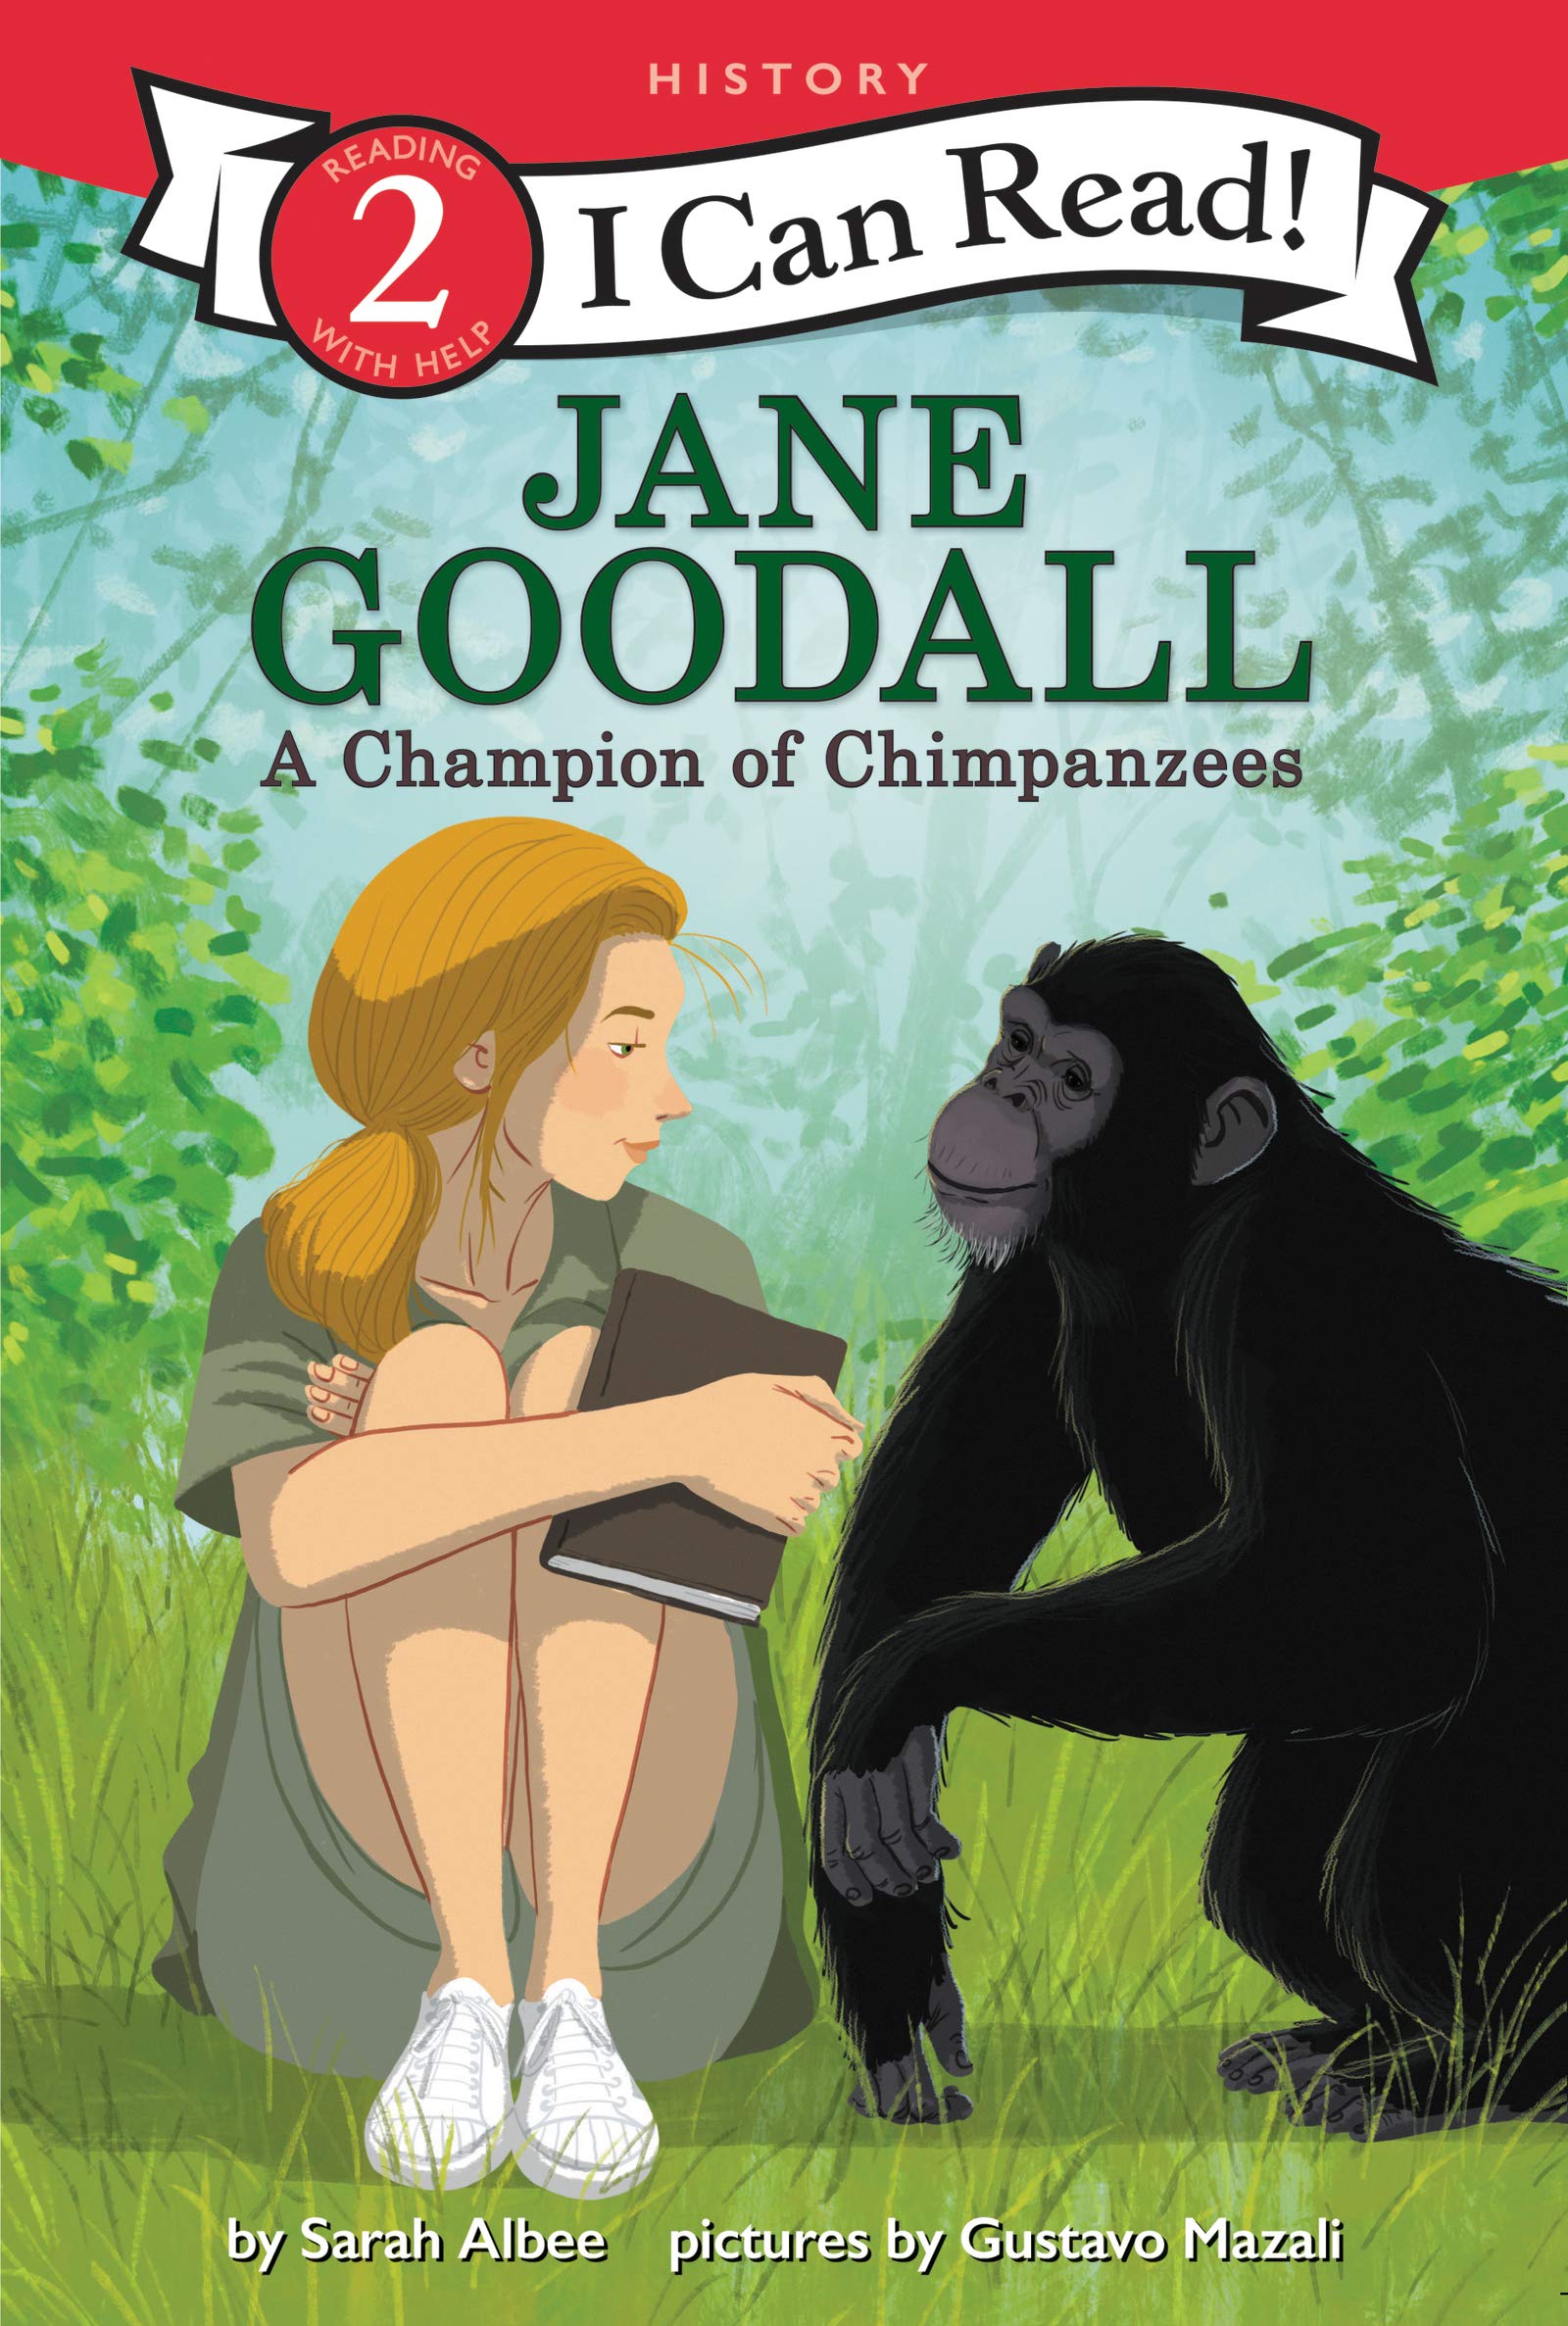 Book cover of JANE GOODALL A CHAMPION OF CHIMPANZEES  